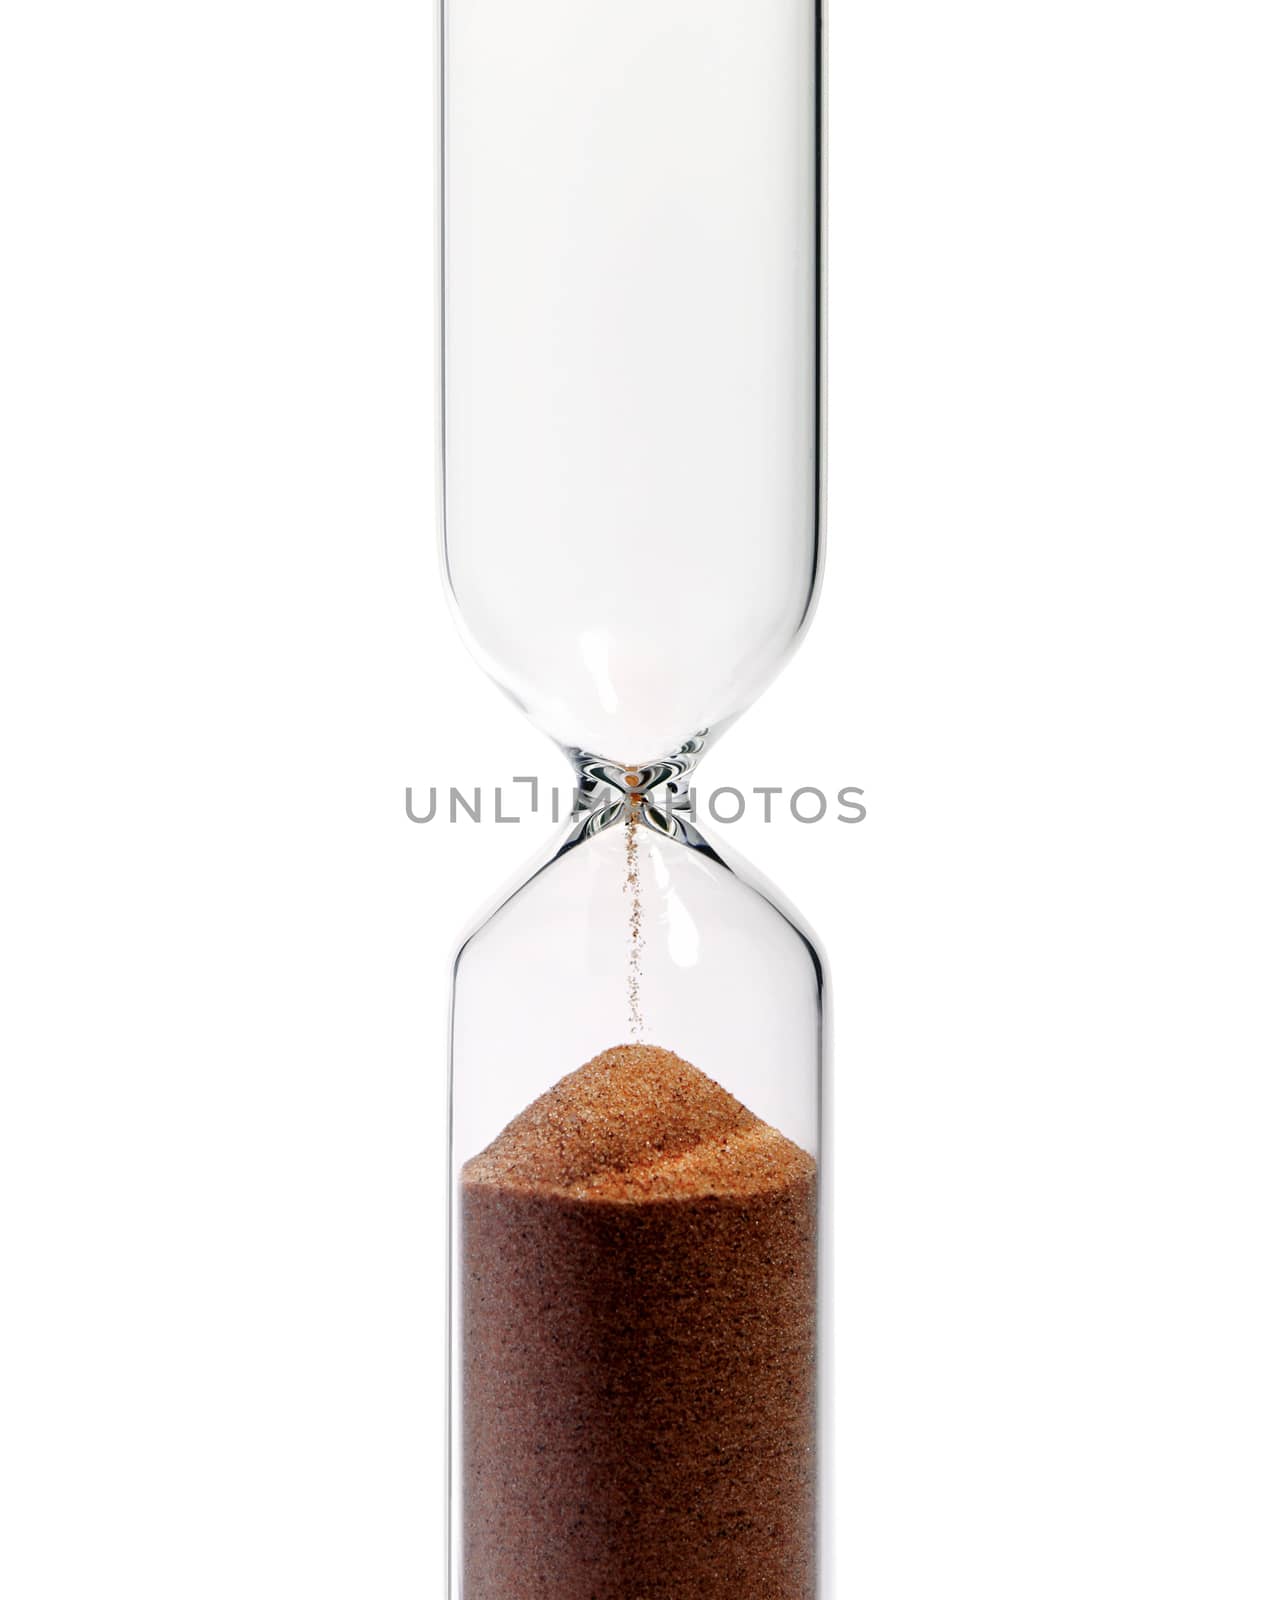 A vertical hourglass, isolated on white background, showing that the time has passed.